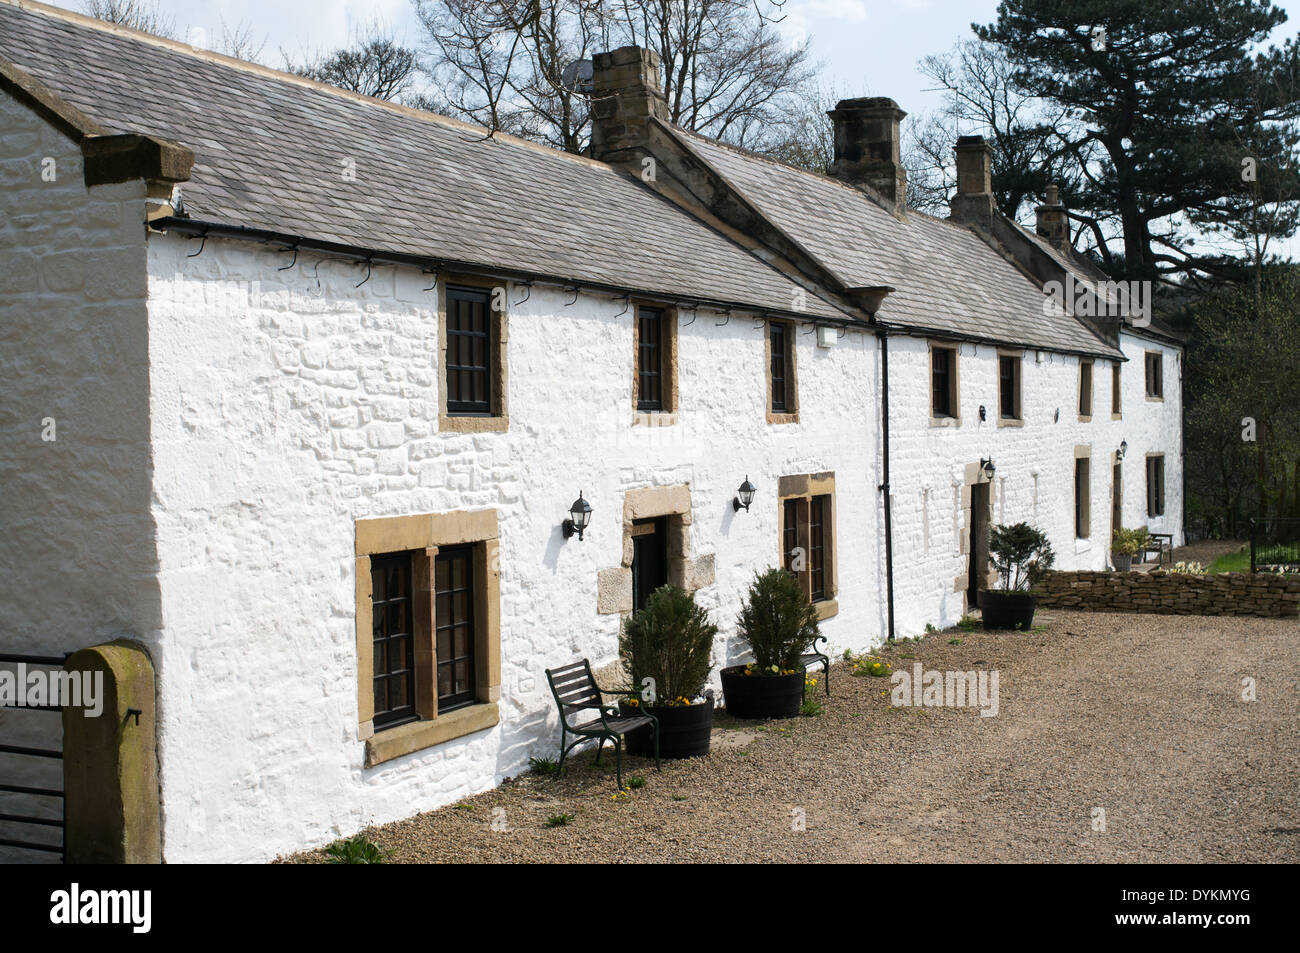 Row of whitewashed cottages Allensford, previously the Belsay Castle Inn, north east England UK Stock Photo